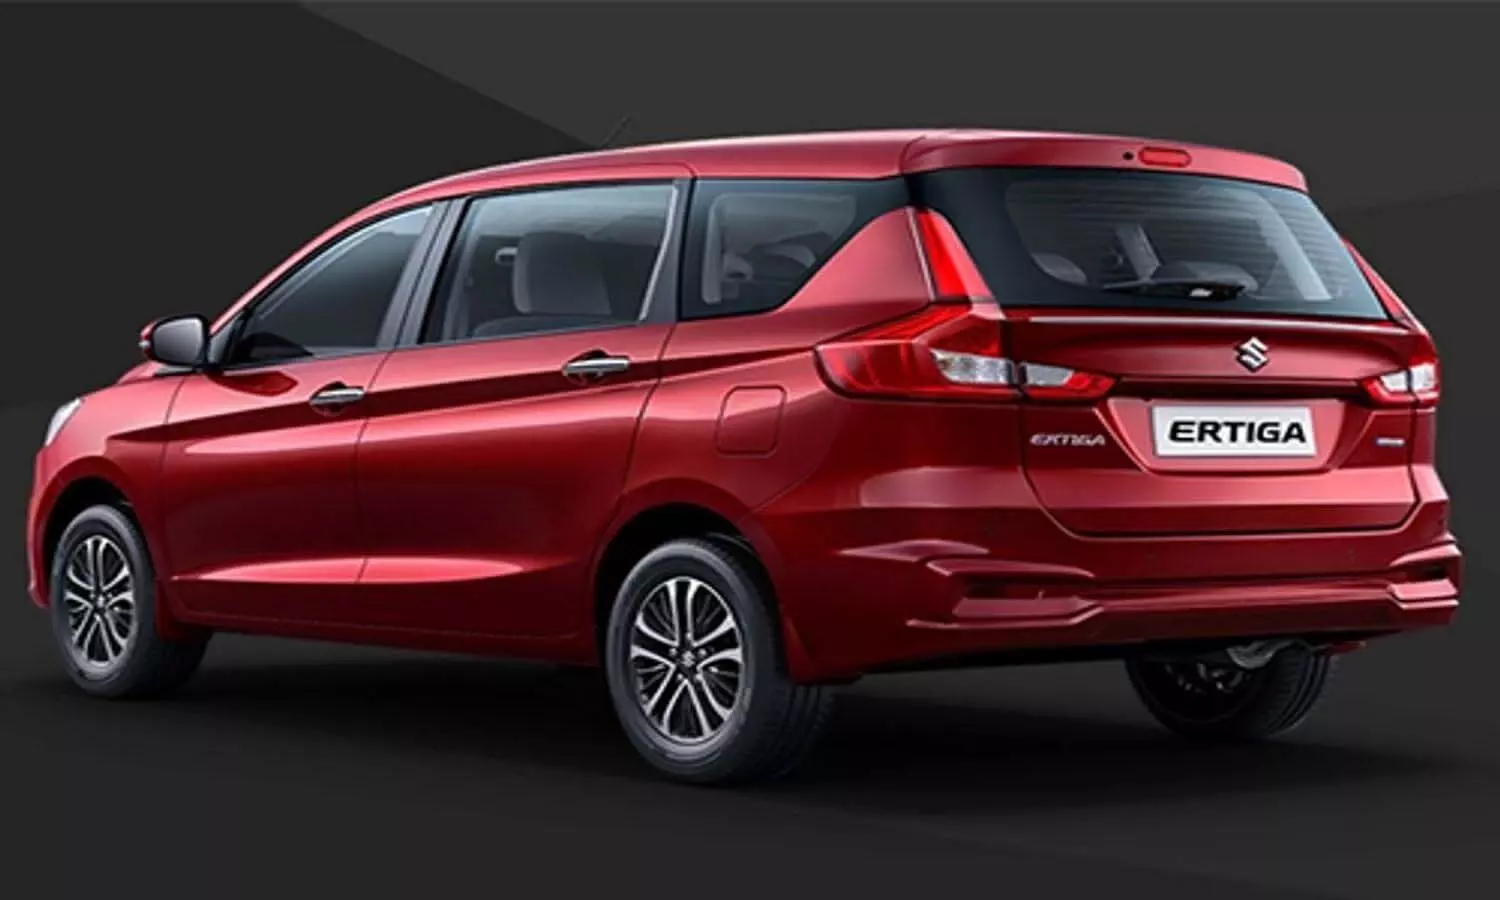 ABS with EBD in premium 7 seater car, Marutis Ertiga launched with great features